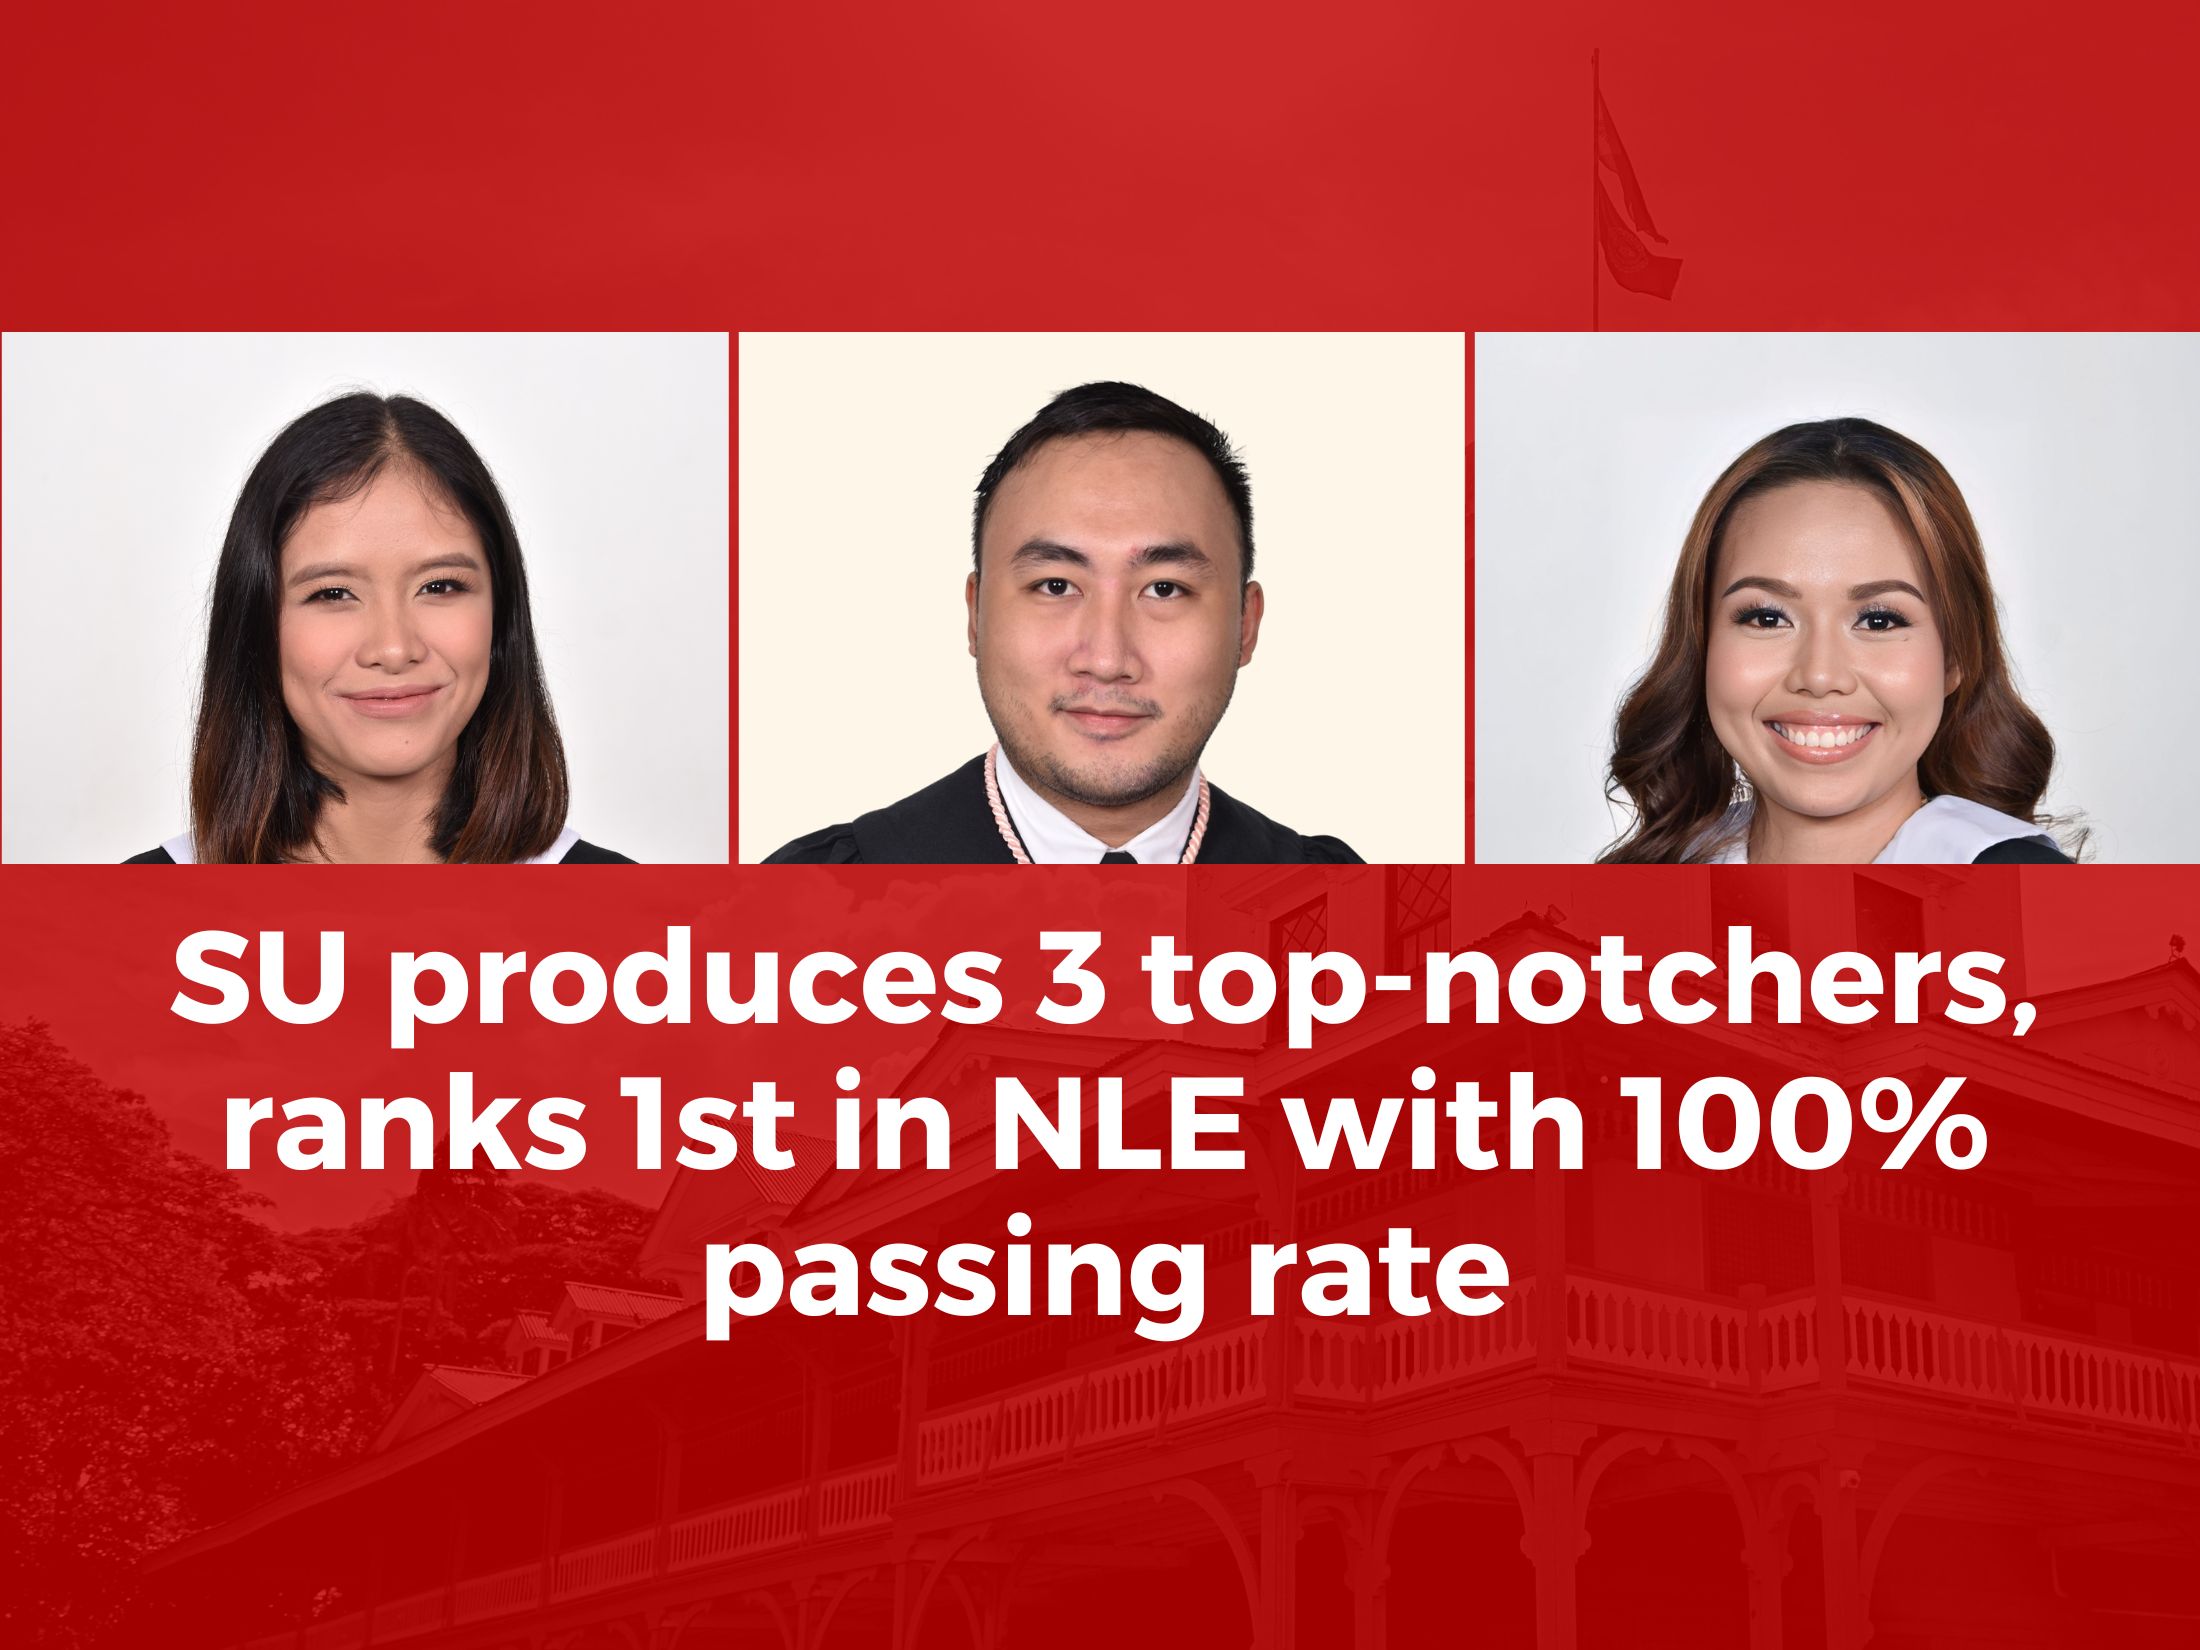 SU produces 3 top-notchers, ranks 1st in NLE with 100% passing rate